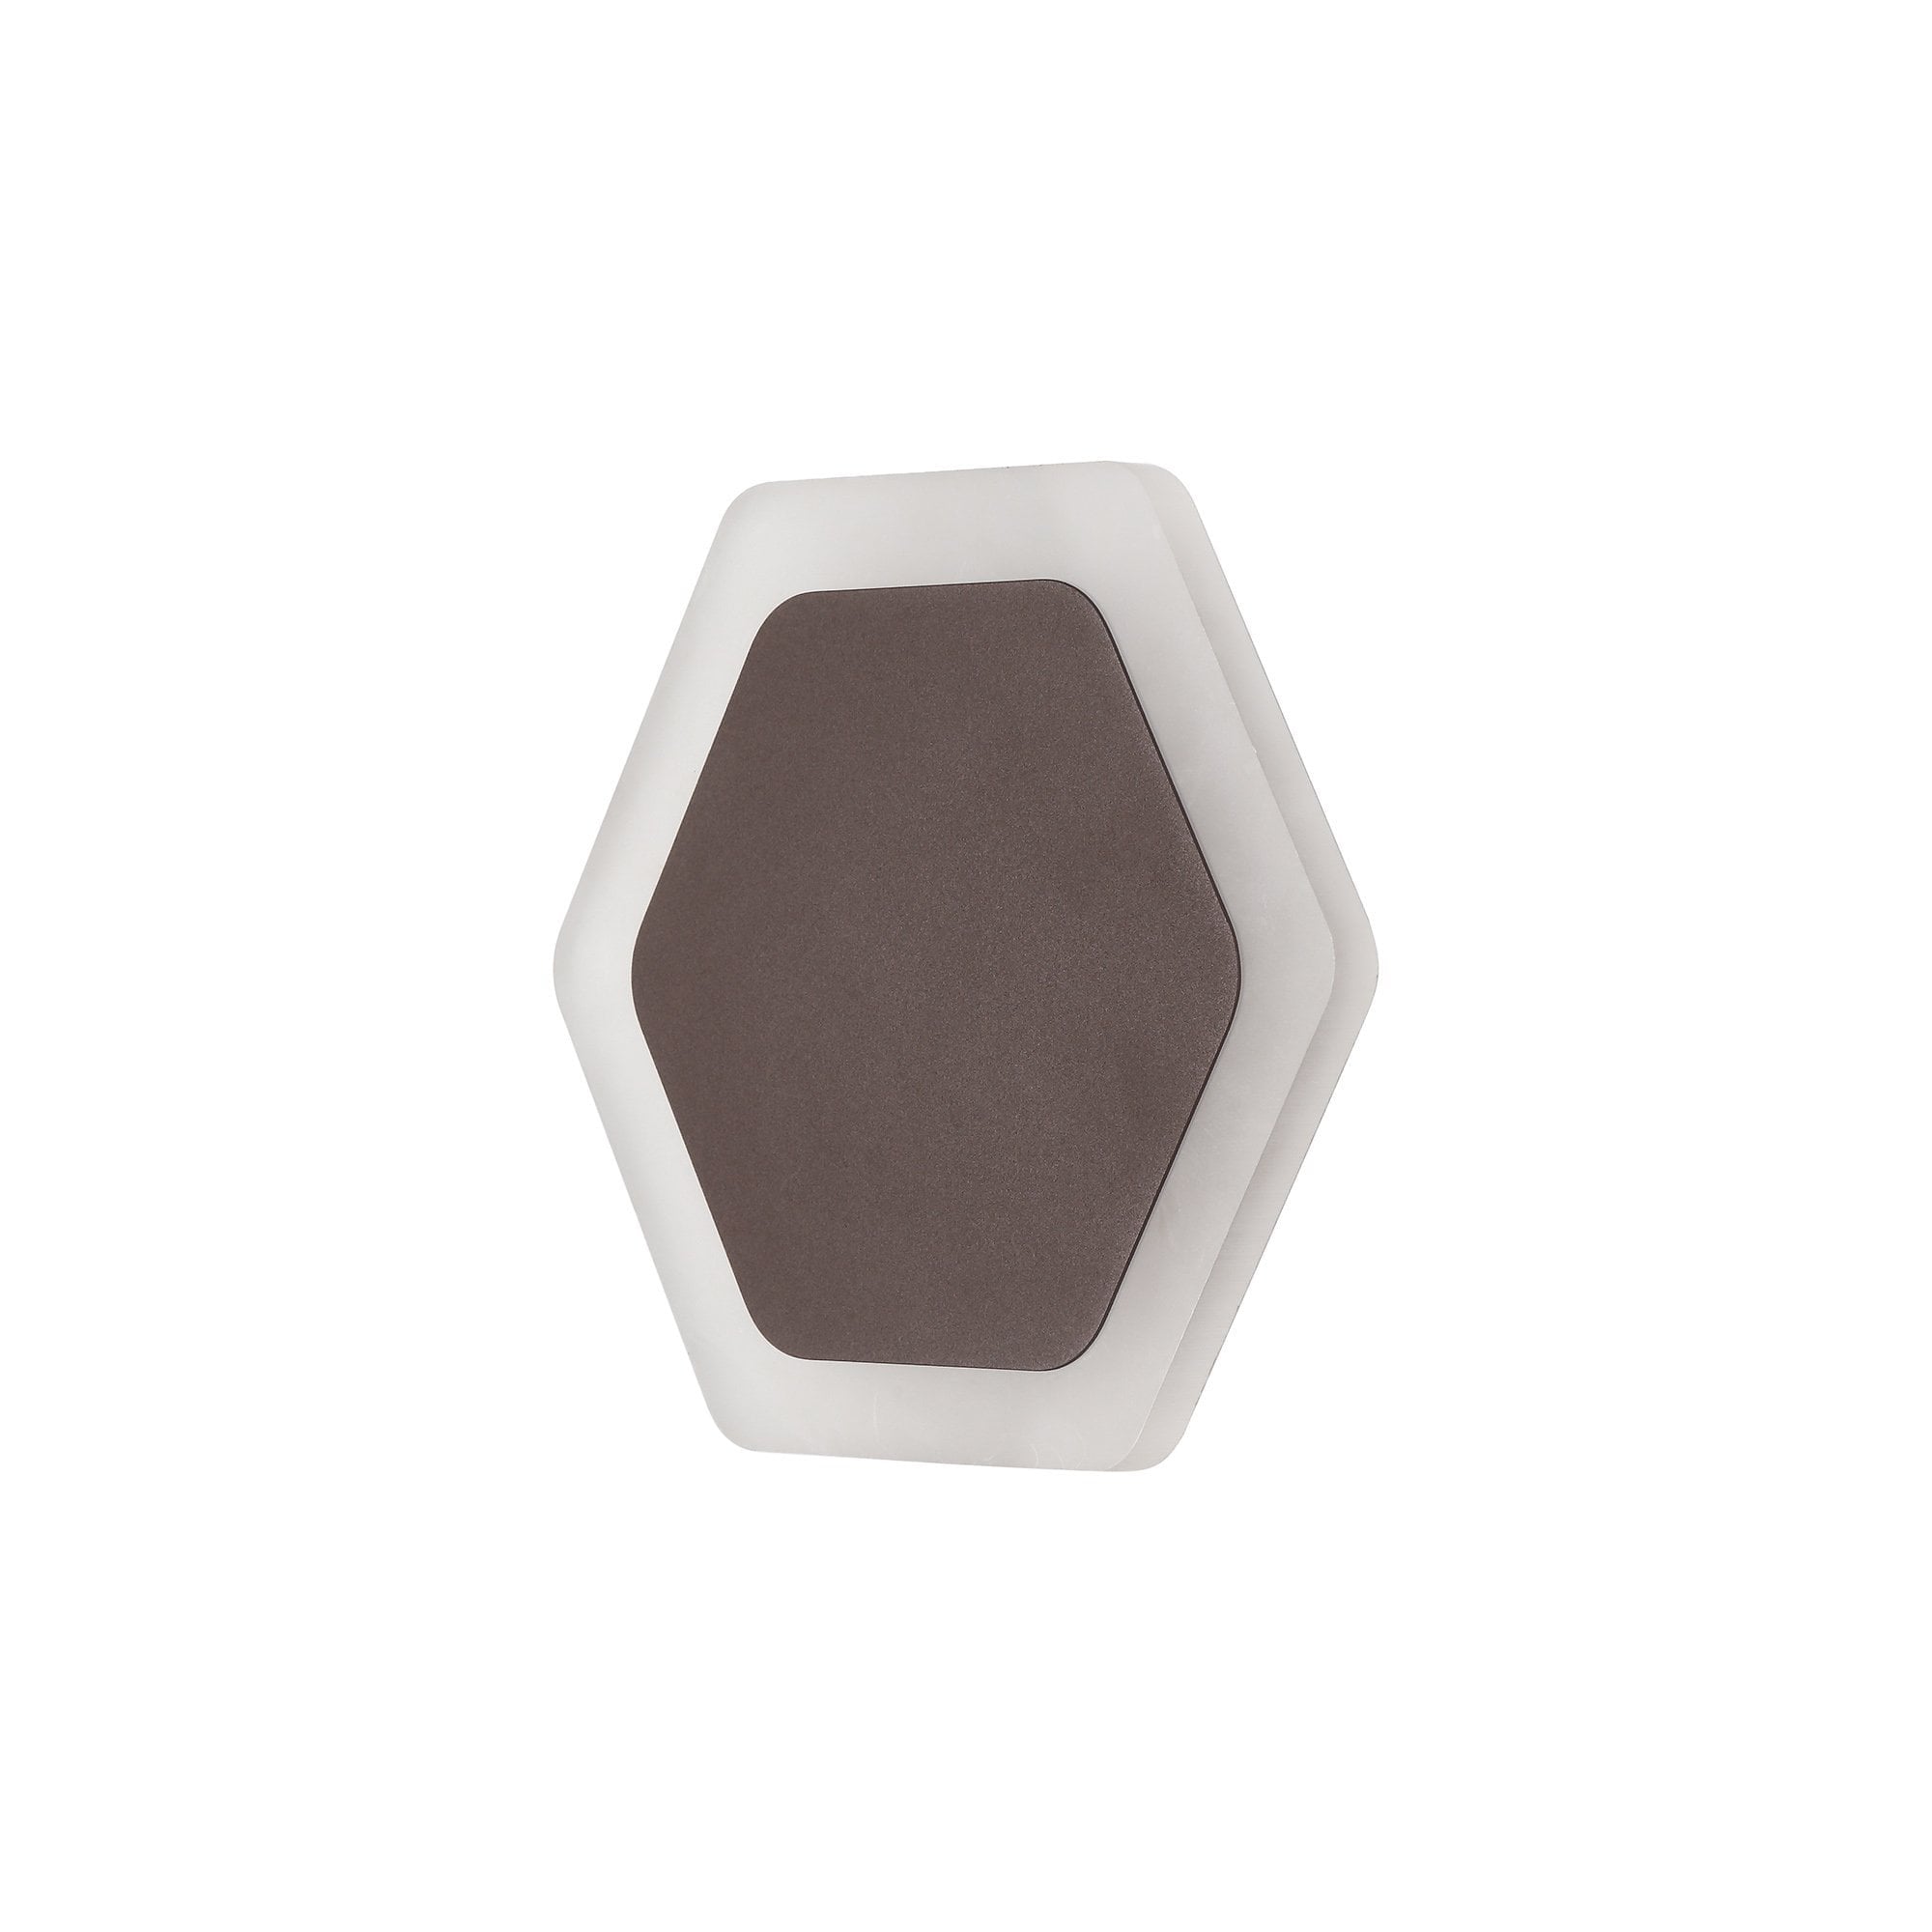 Magnetic Base Wall Lamp, 12W LED 3000K 498lm, 15/19cm Horizontal Hexagonal Centre, Coffee/Acrylic Frosted Diffuser